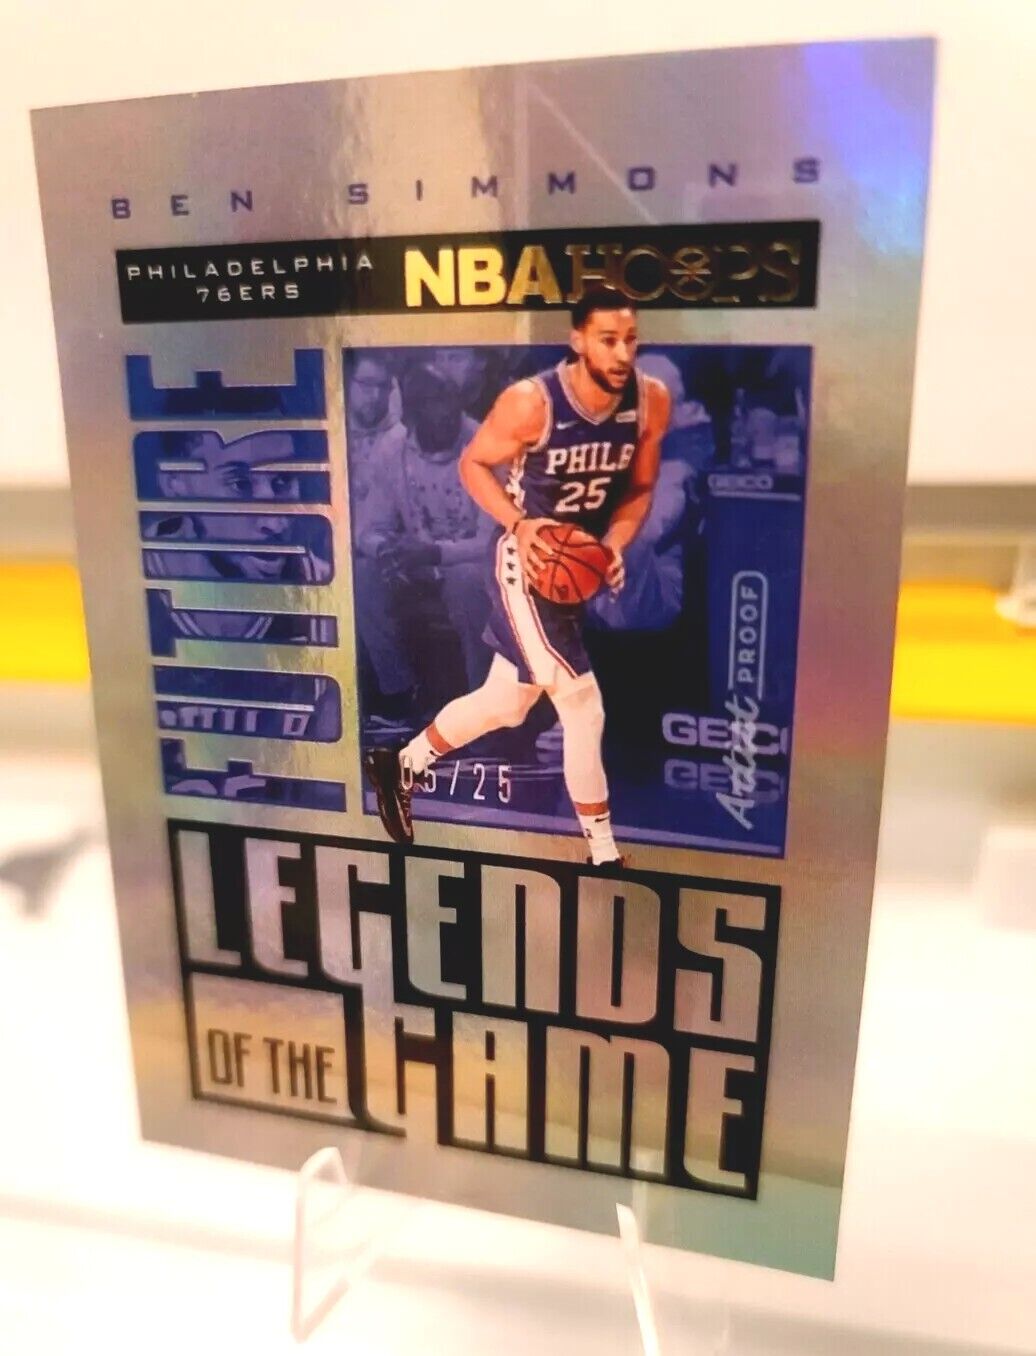 2020-21 Hoops #25 Ben Simmons Future Legends of the Game Artist Proof 5/25